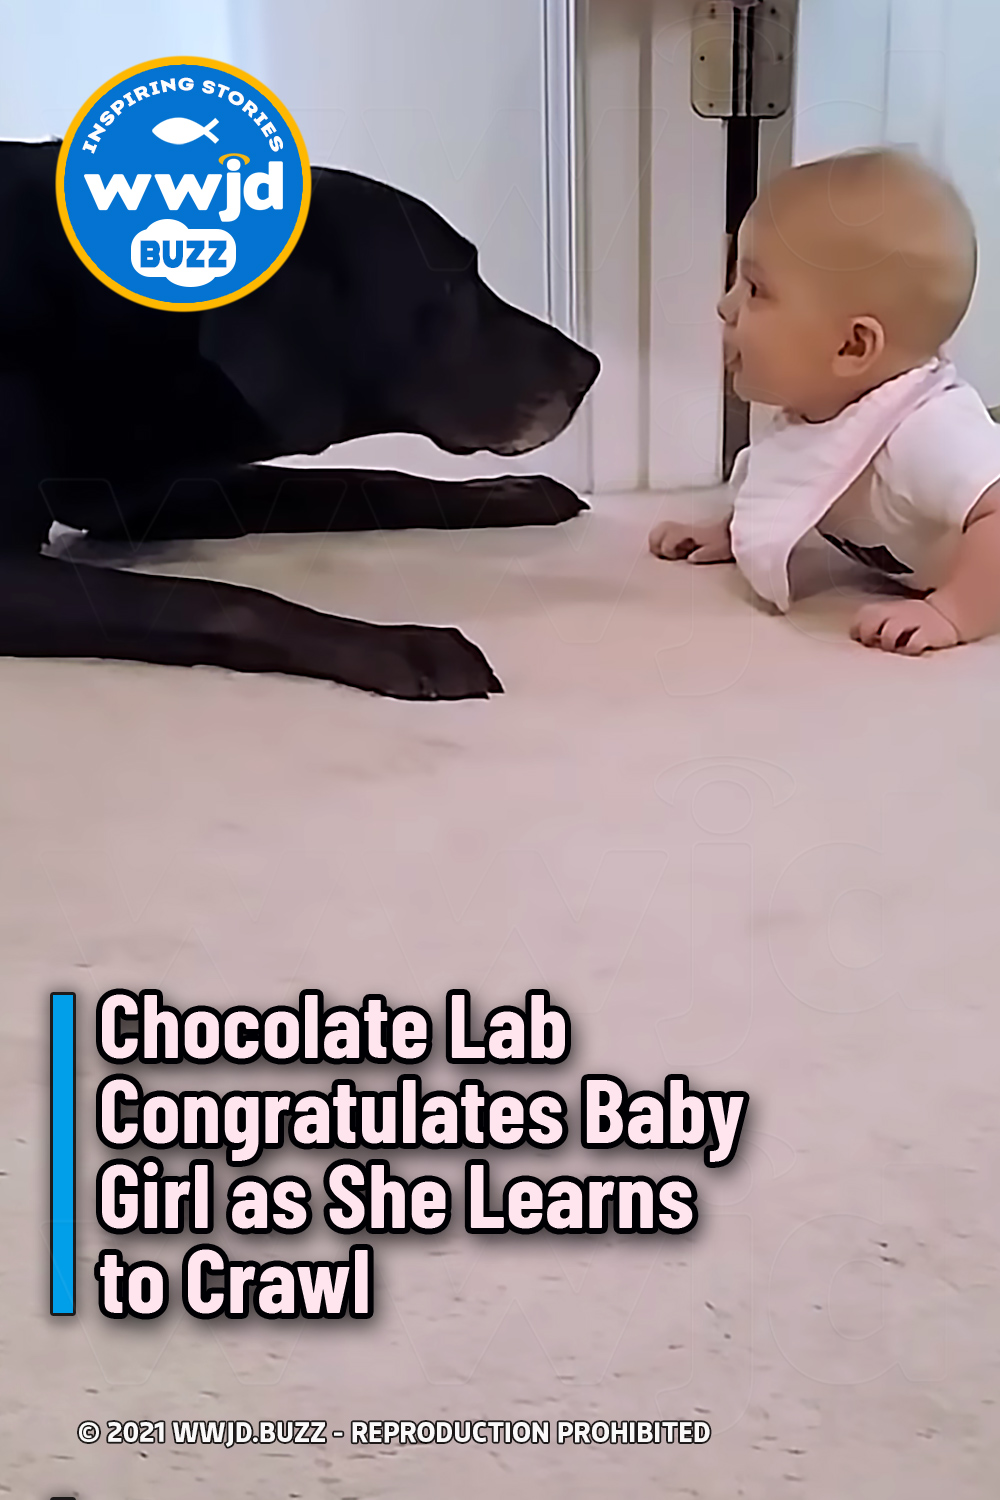 Chocolate Lab Congratulates Baby Girl as She Learns to Crawl